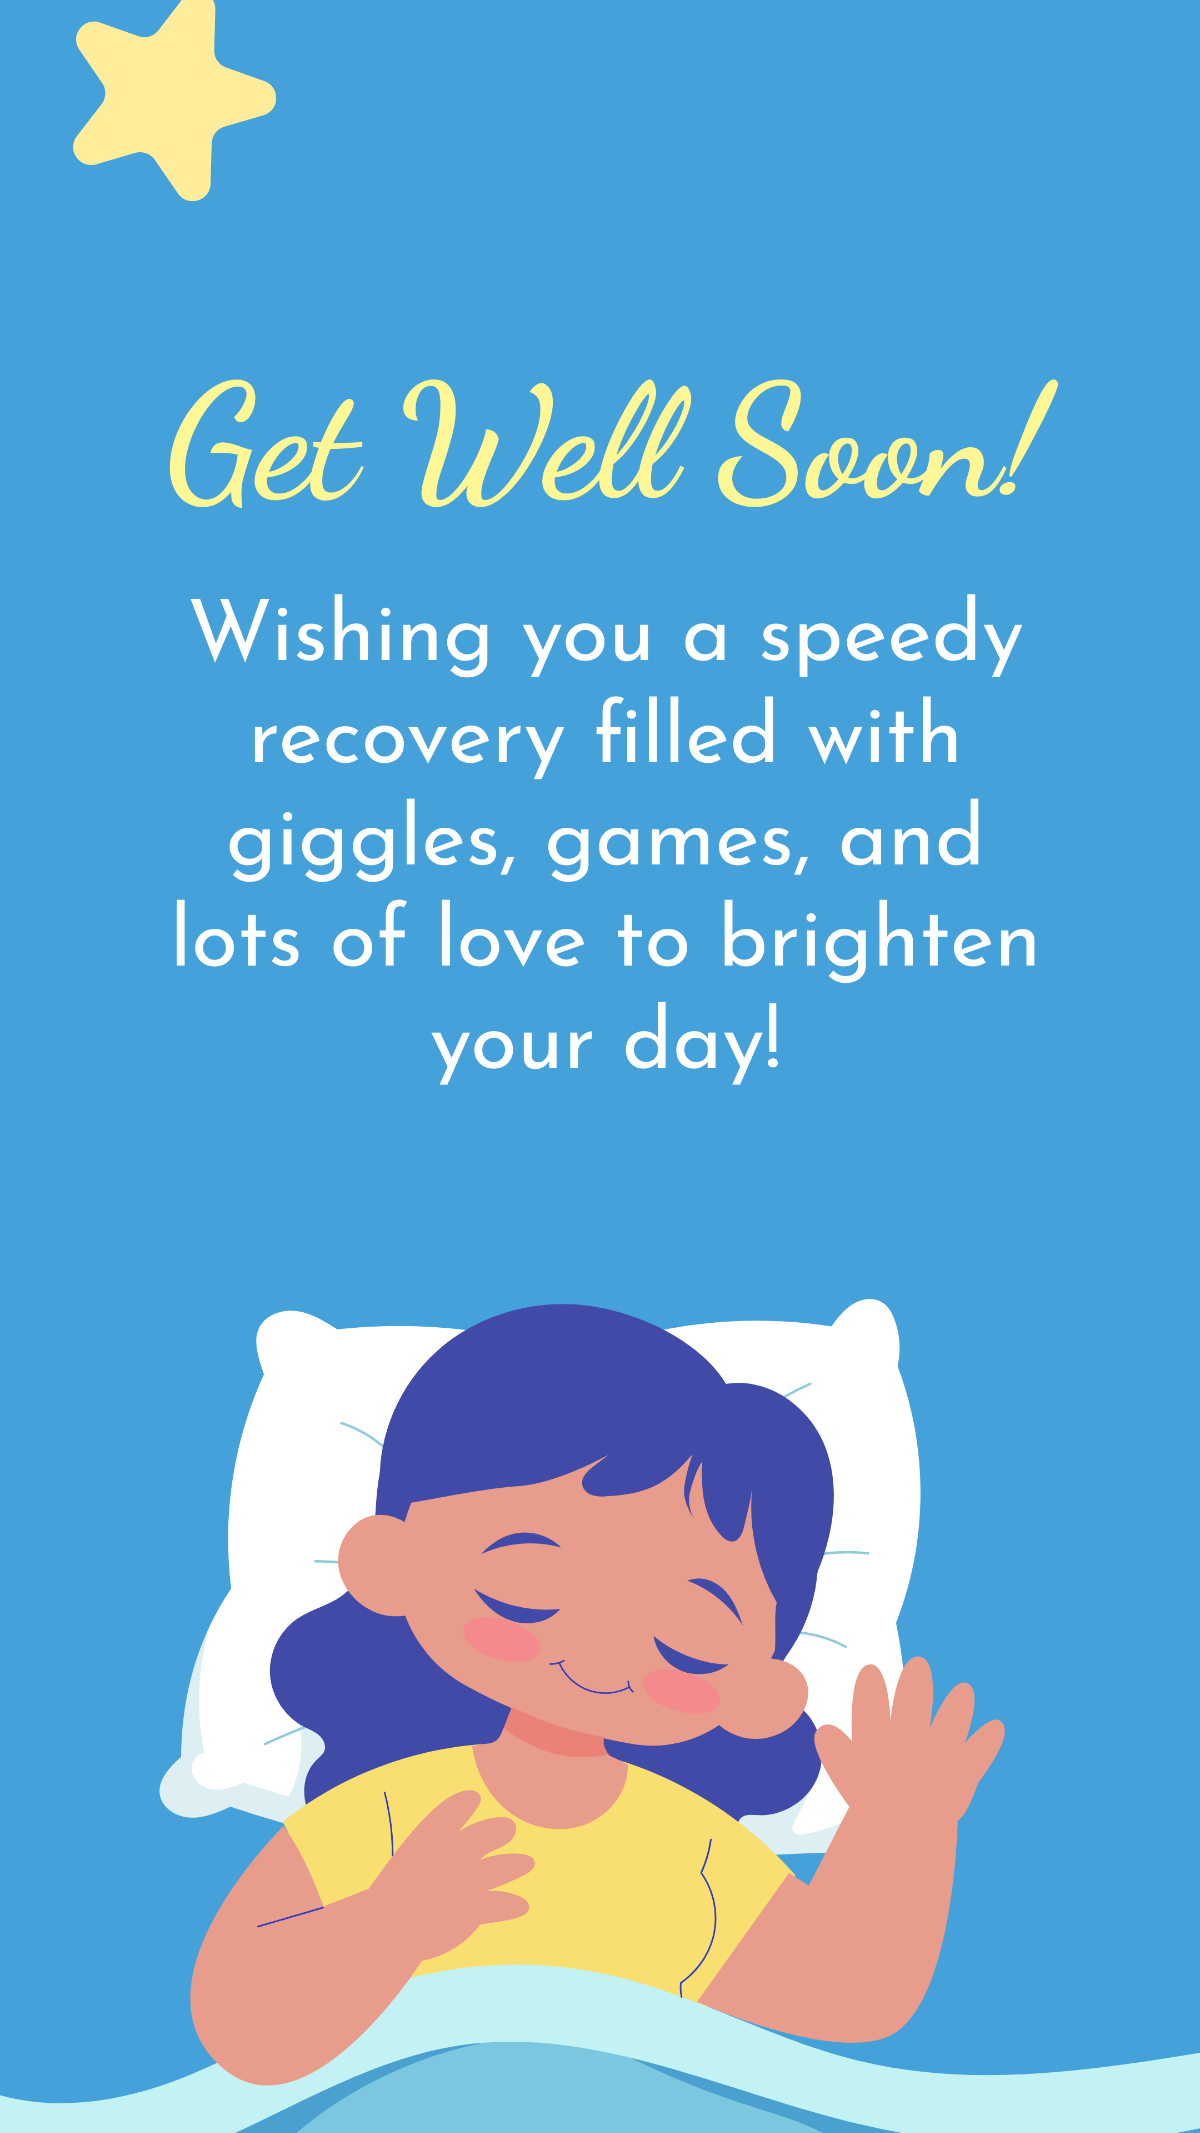 Get Well Soon Message For Kids Template